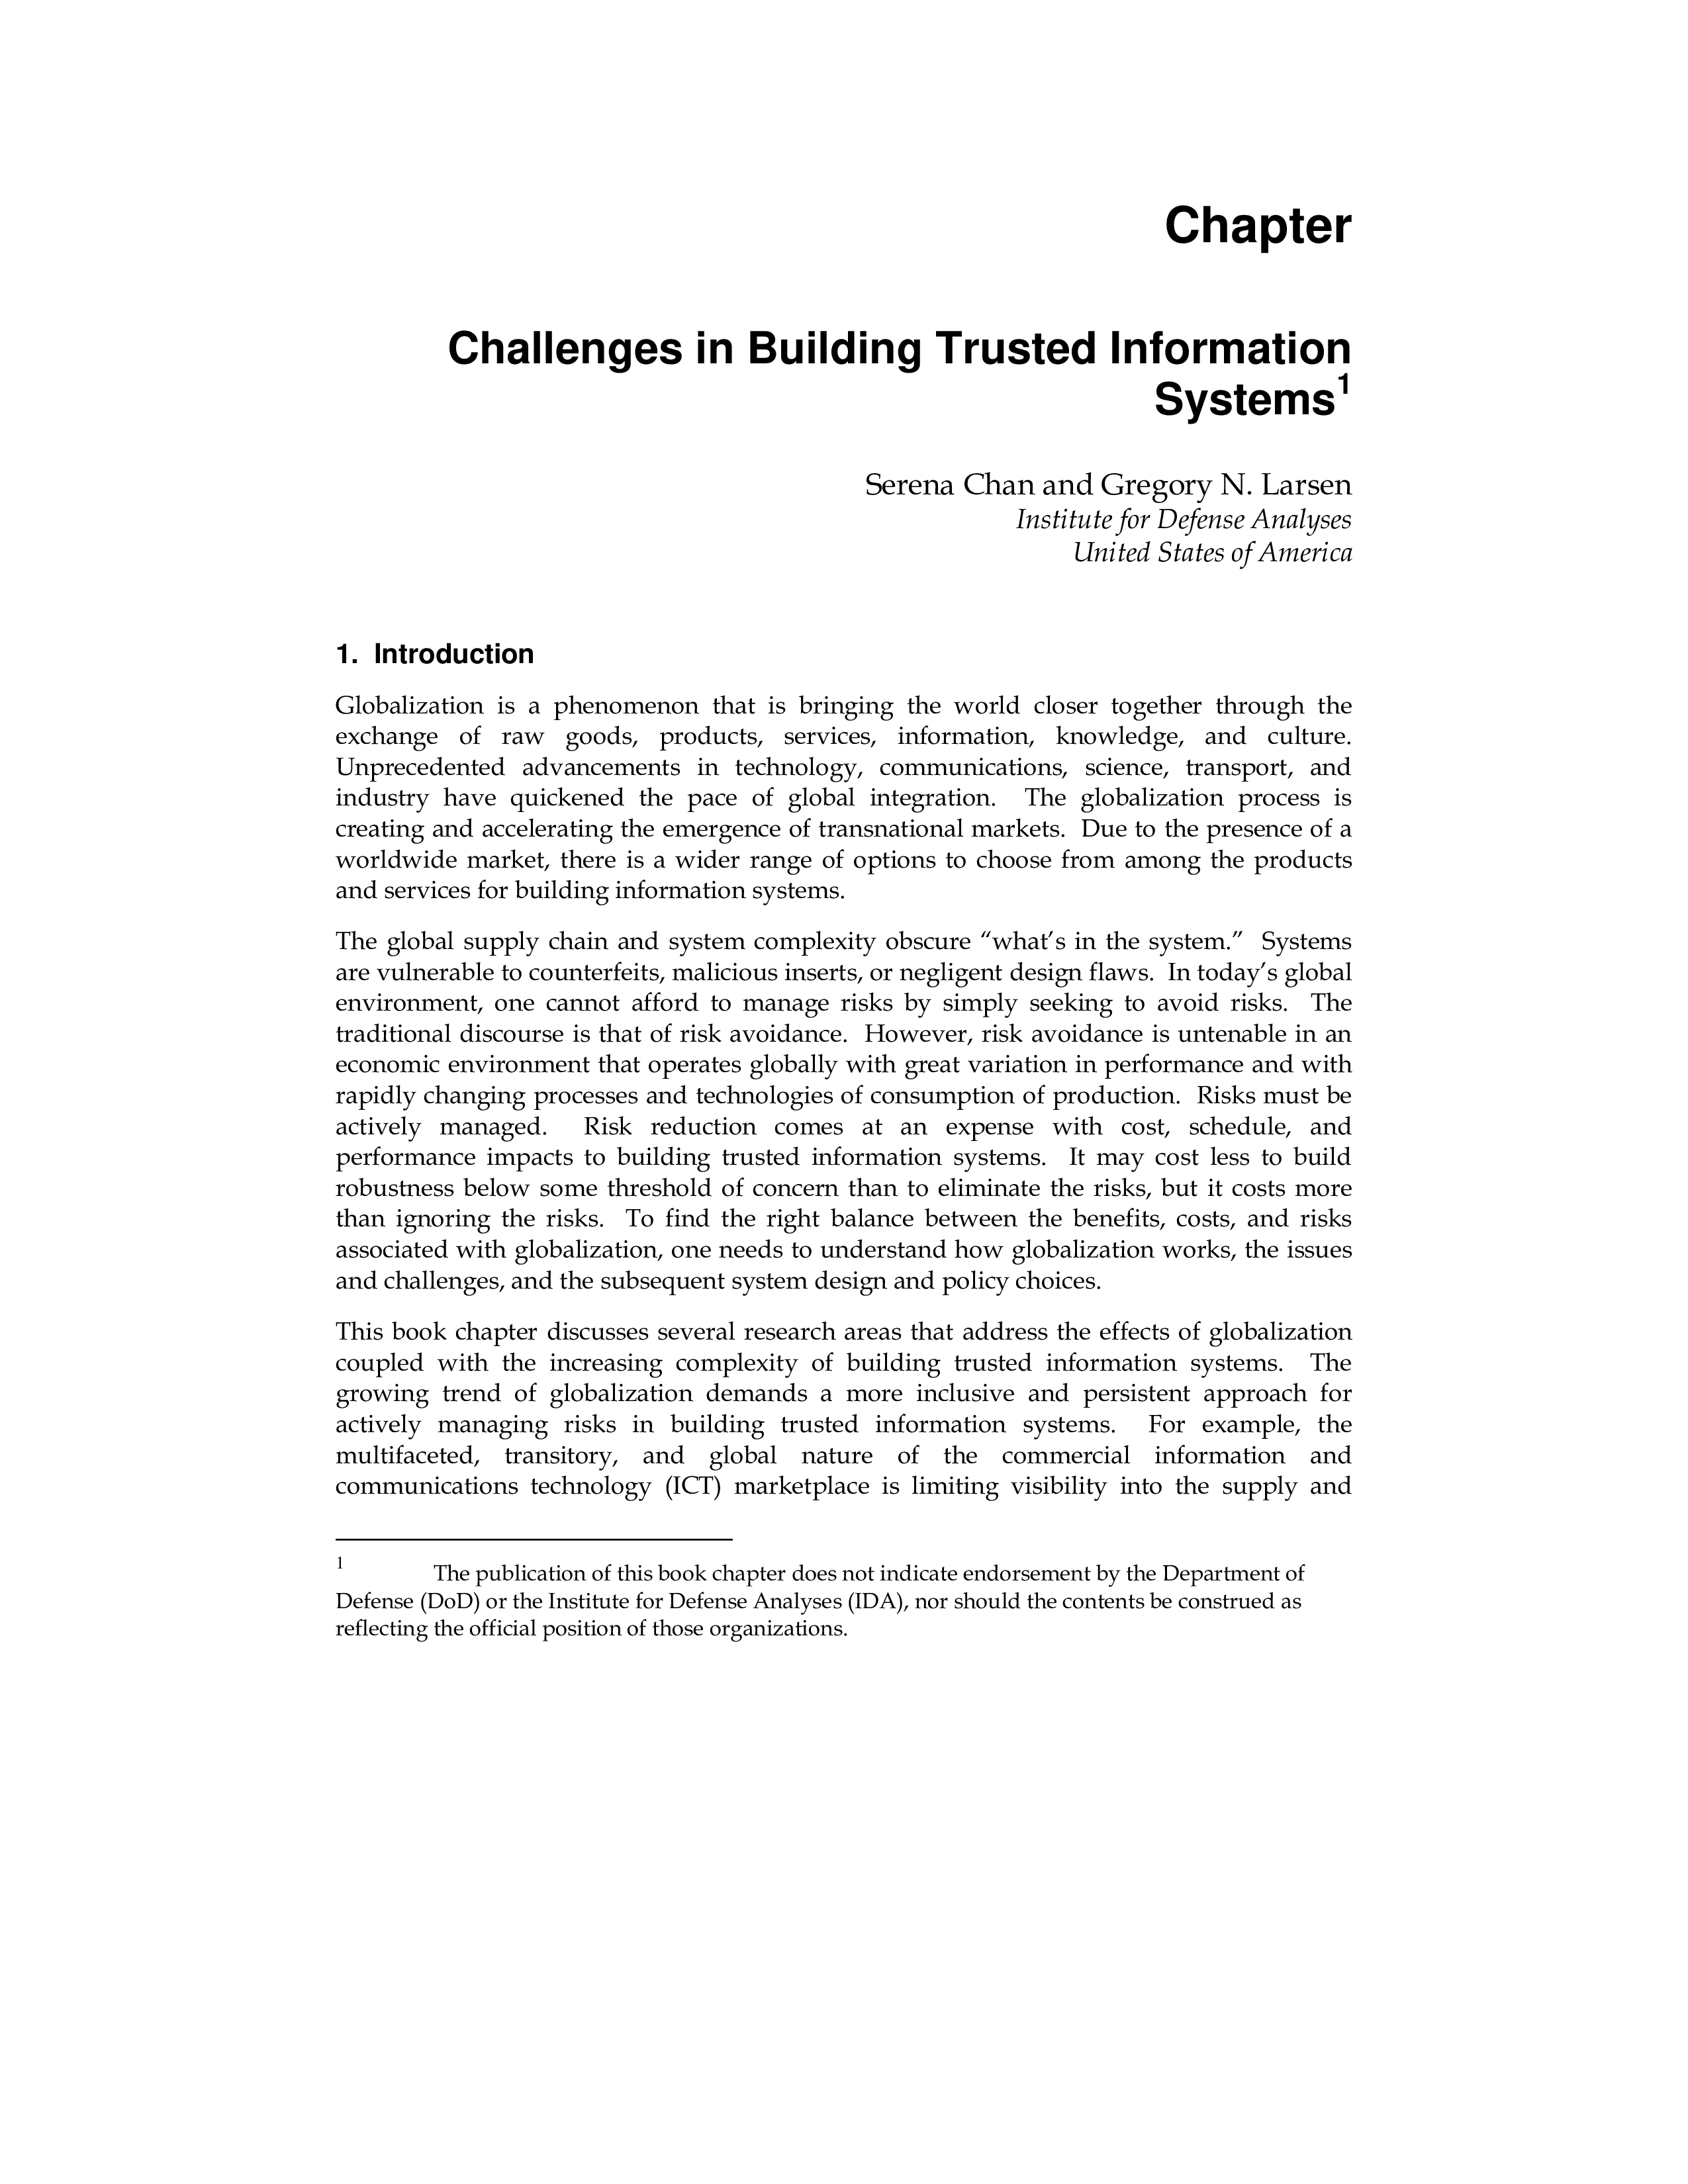 Challenges in Building Trusted Information Systems